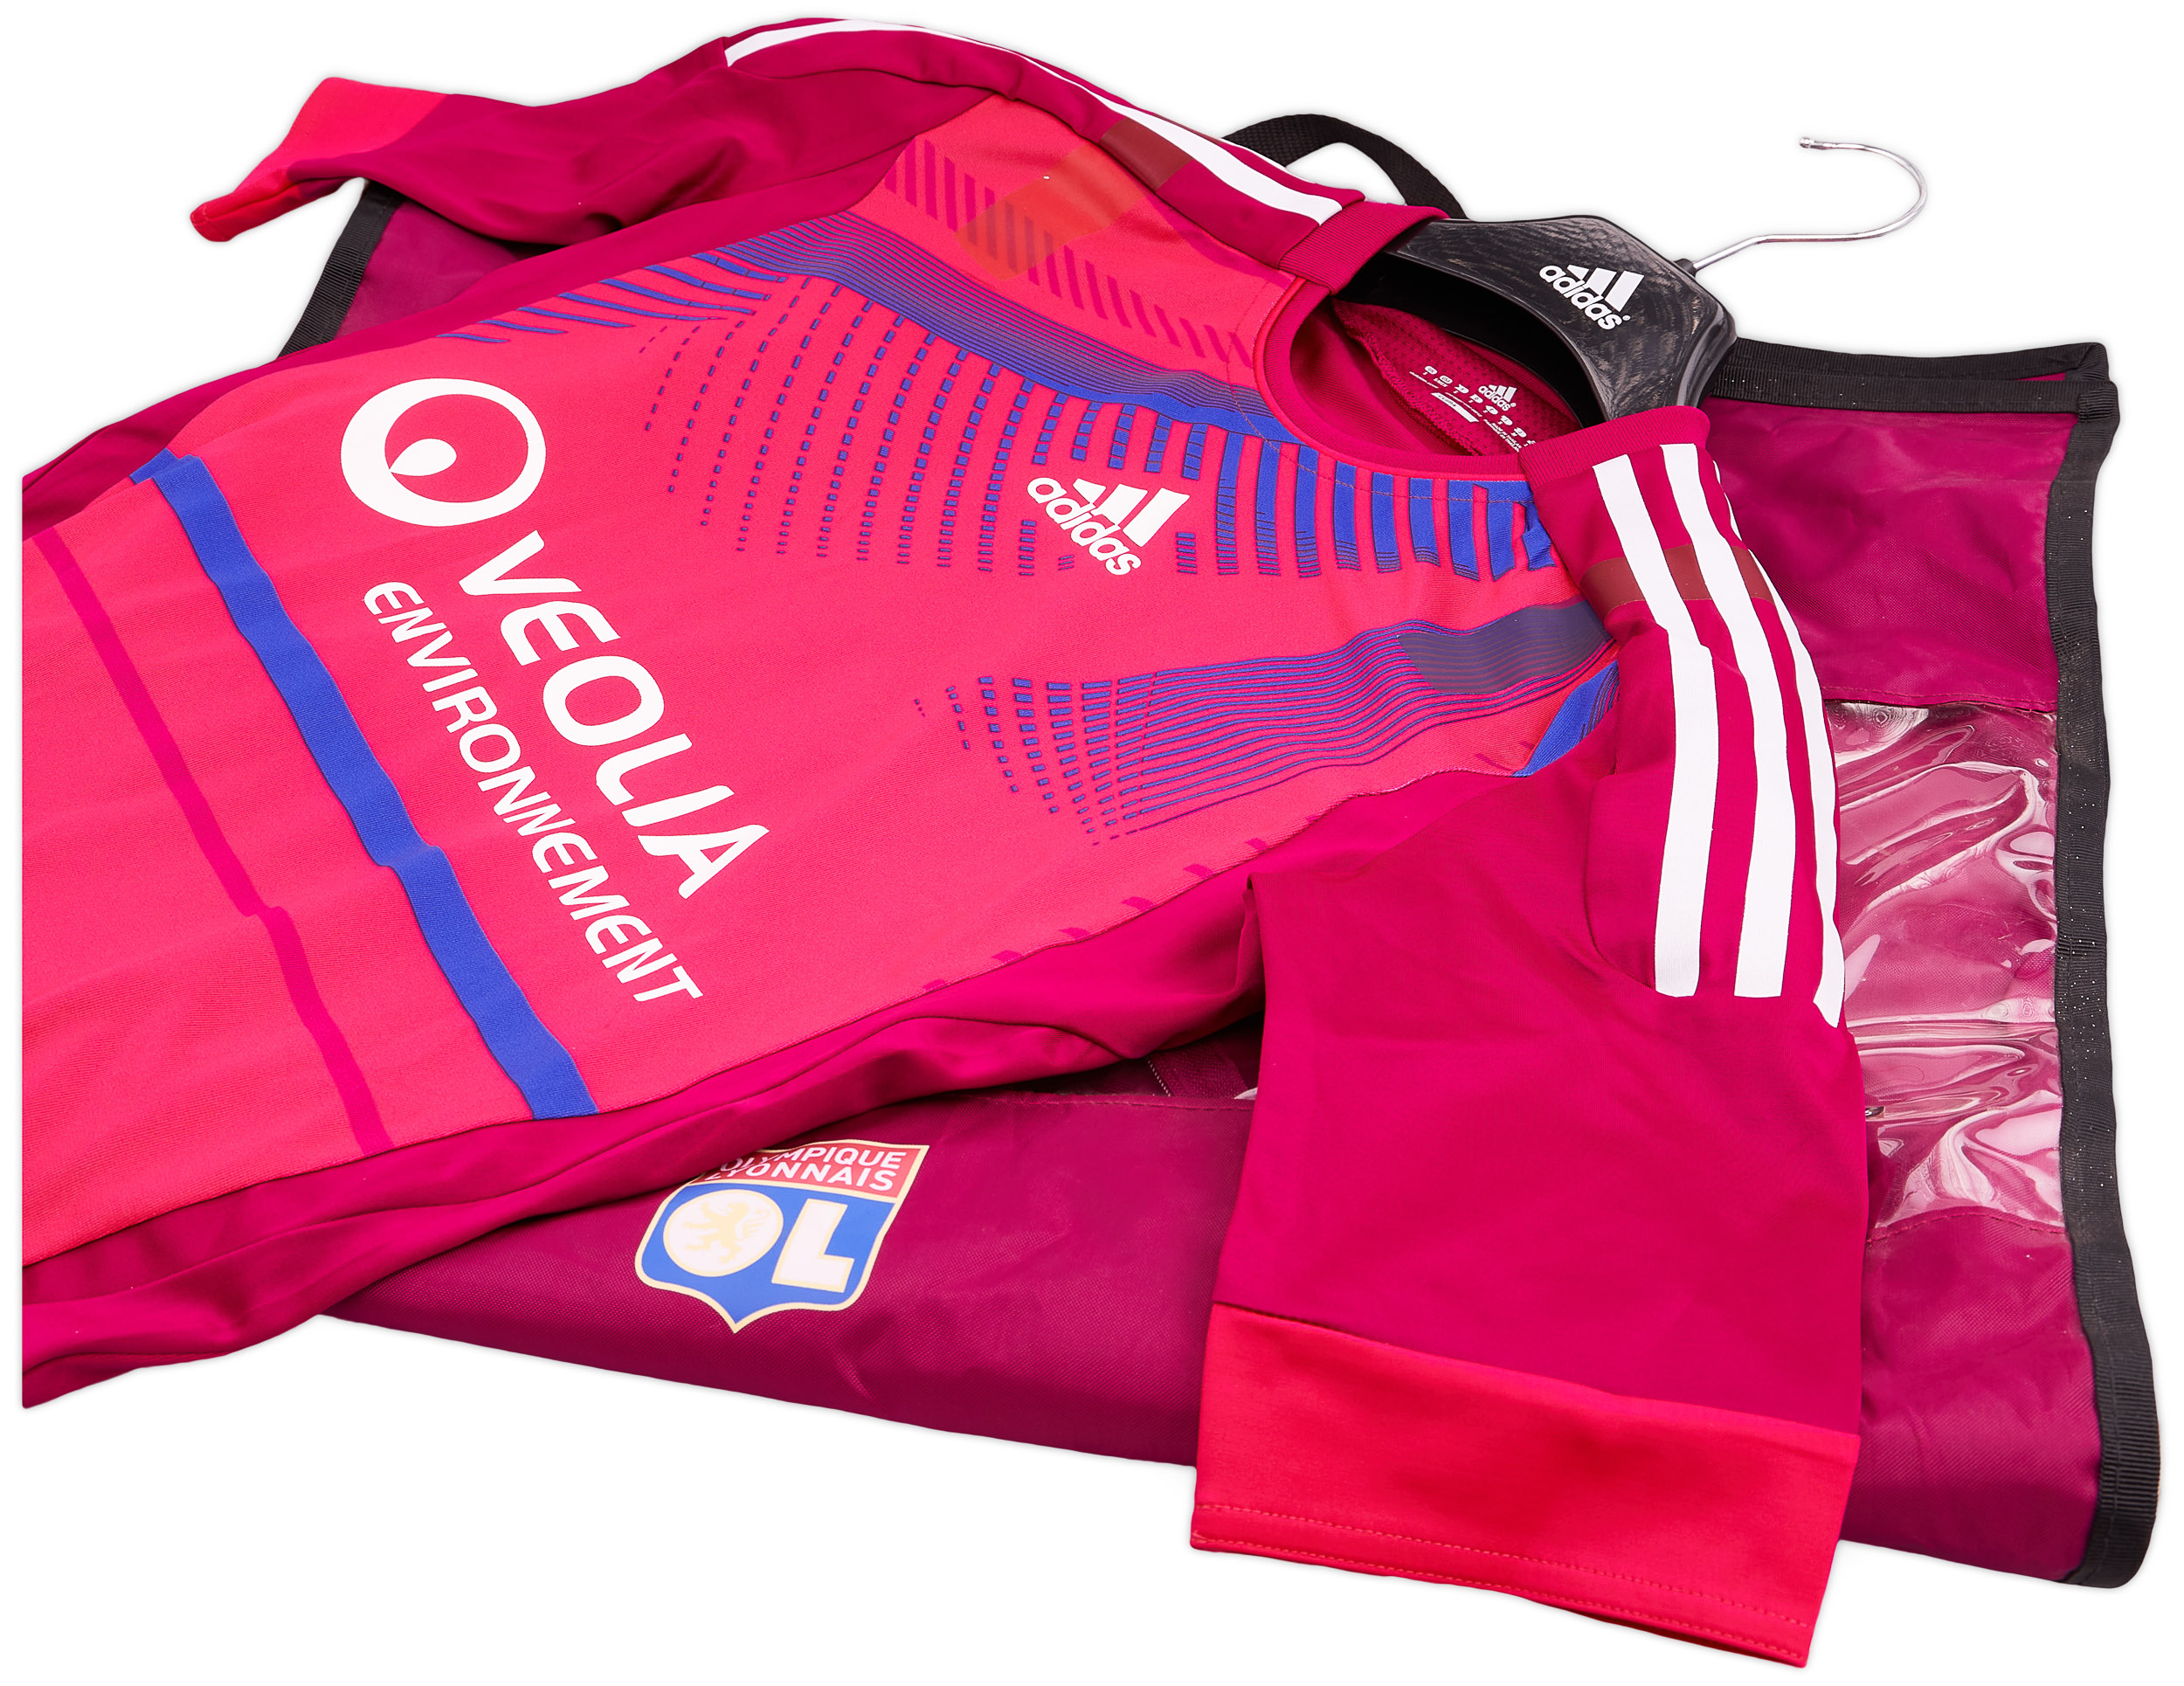 2011-12 Lyon Limited Edition Player Issue TechFit Third Shirt ()